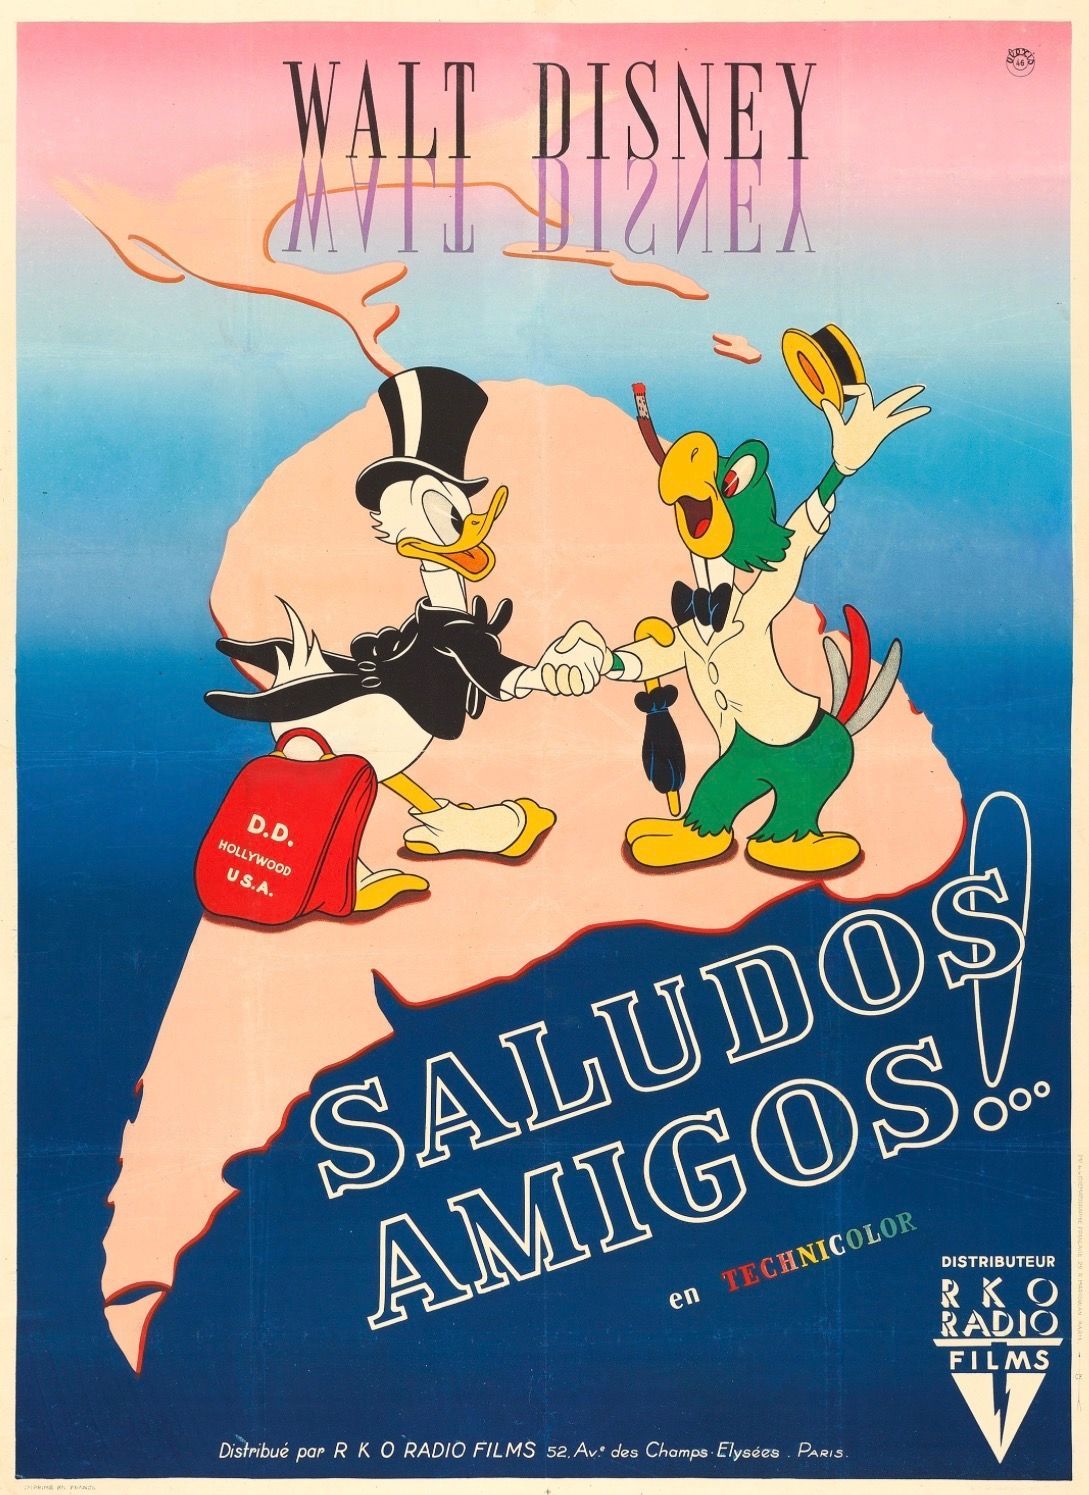 Saludos amigos, French movie poster, 1942. French movie posters, Concept art, Disney package